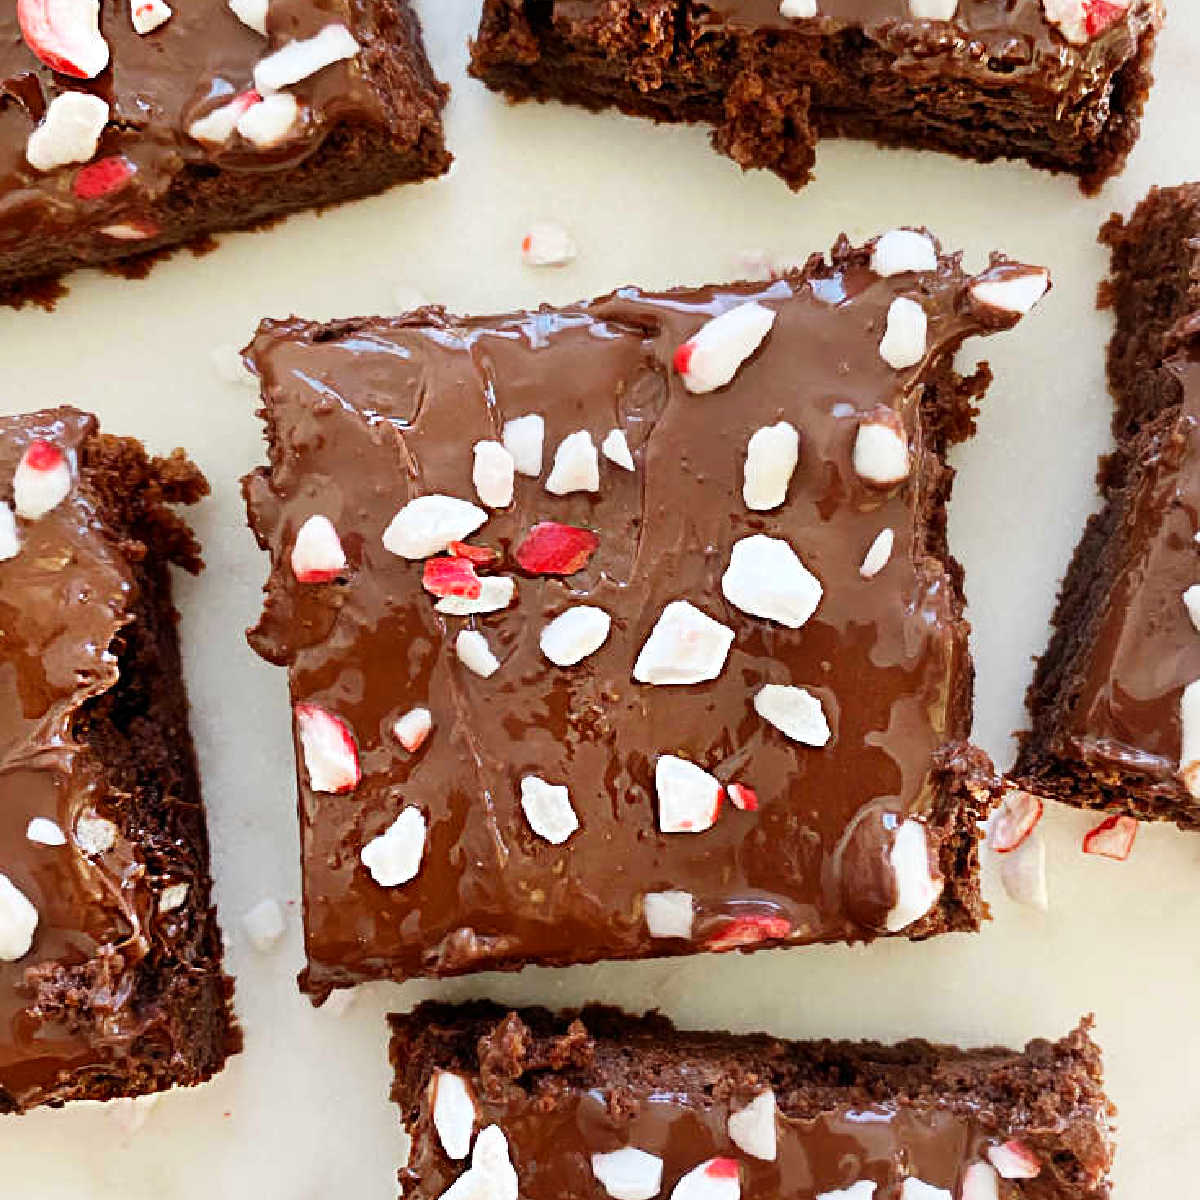 peppermint brownies with chocolate frosting and crushed candy canes